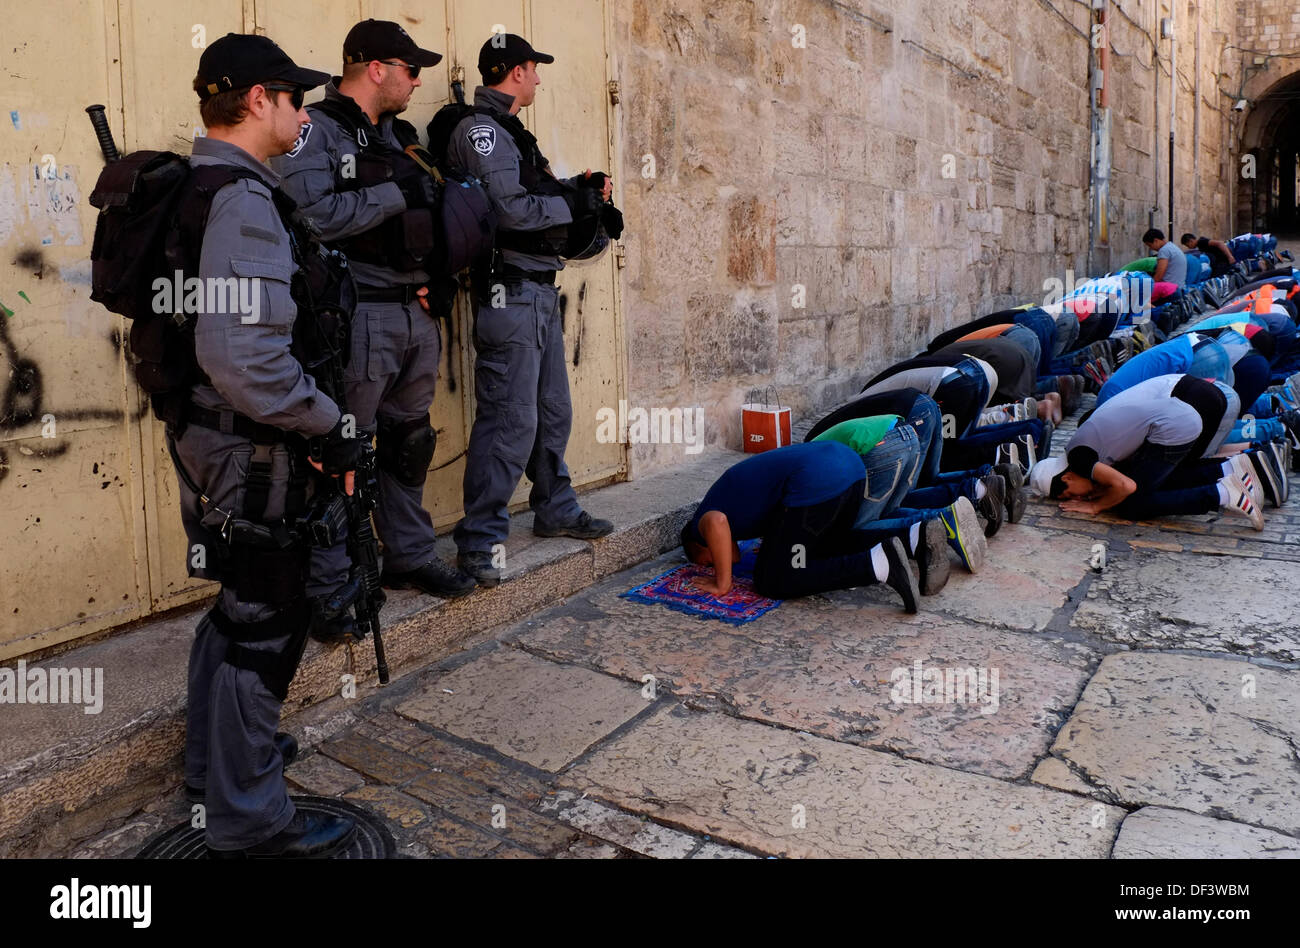 Armed Israeli border policemen stand guard next to Palestinians who were banned to enter Akza mosque and are praying in the Muslim Quarter of the Old City of Jerusalem on 27 September 2013. Israeli authorities have imposed severe restrictions on Muslim worshippers who want to perform Friday prayer in the Noble Sanctuary. The police allowed Palestinian men over 50 year to enter mosque along with women and children.  Credit:  Eddie Gerald/Alamy Live News Stock Photo